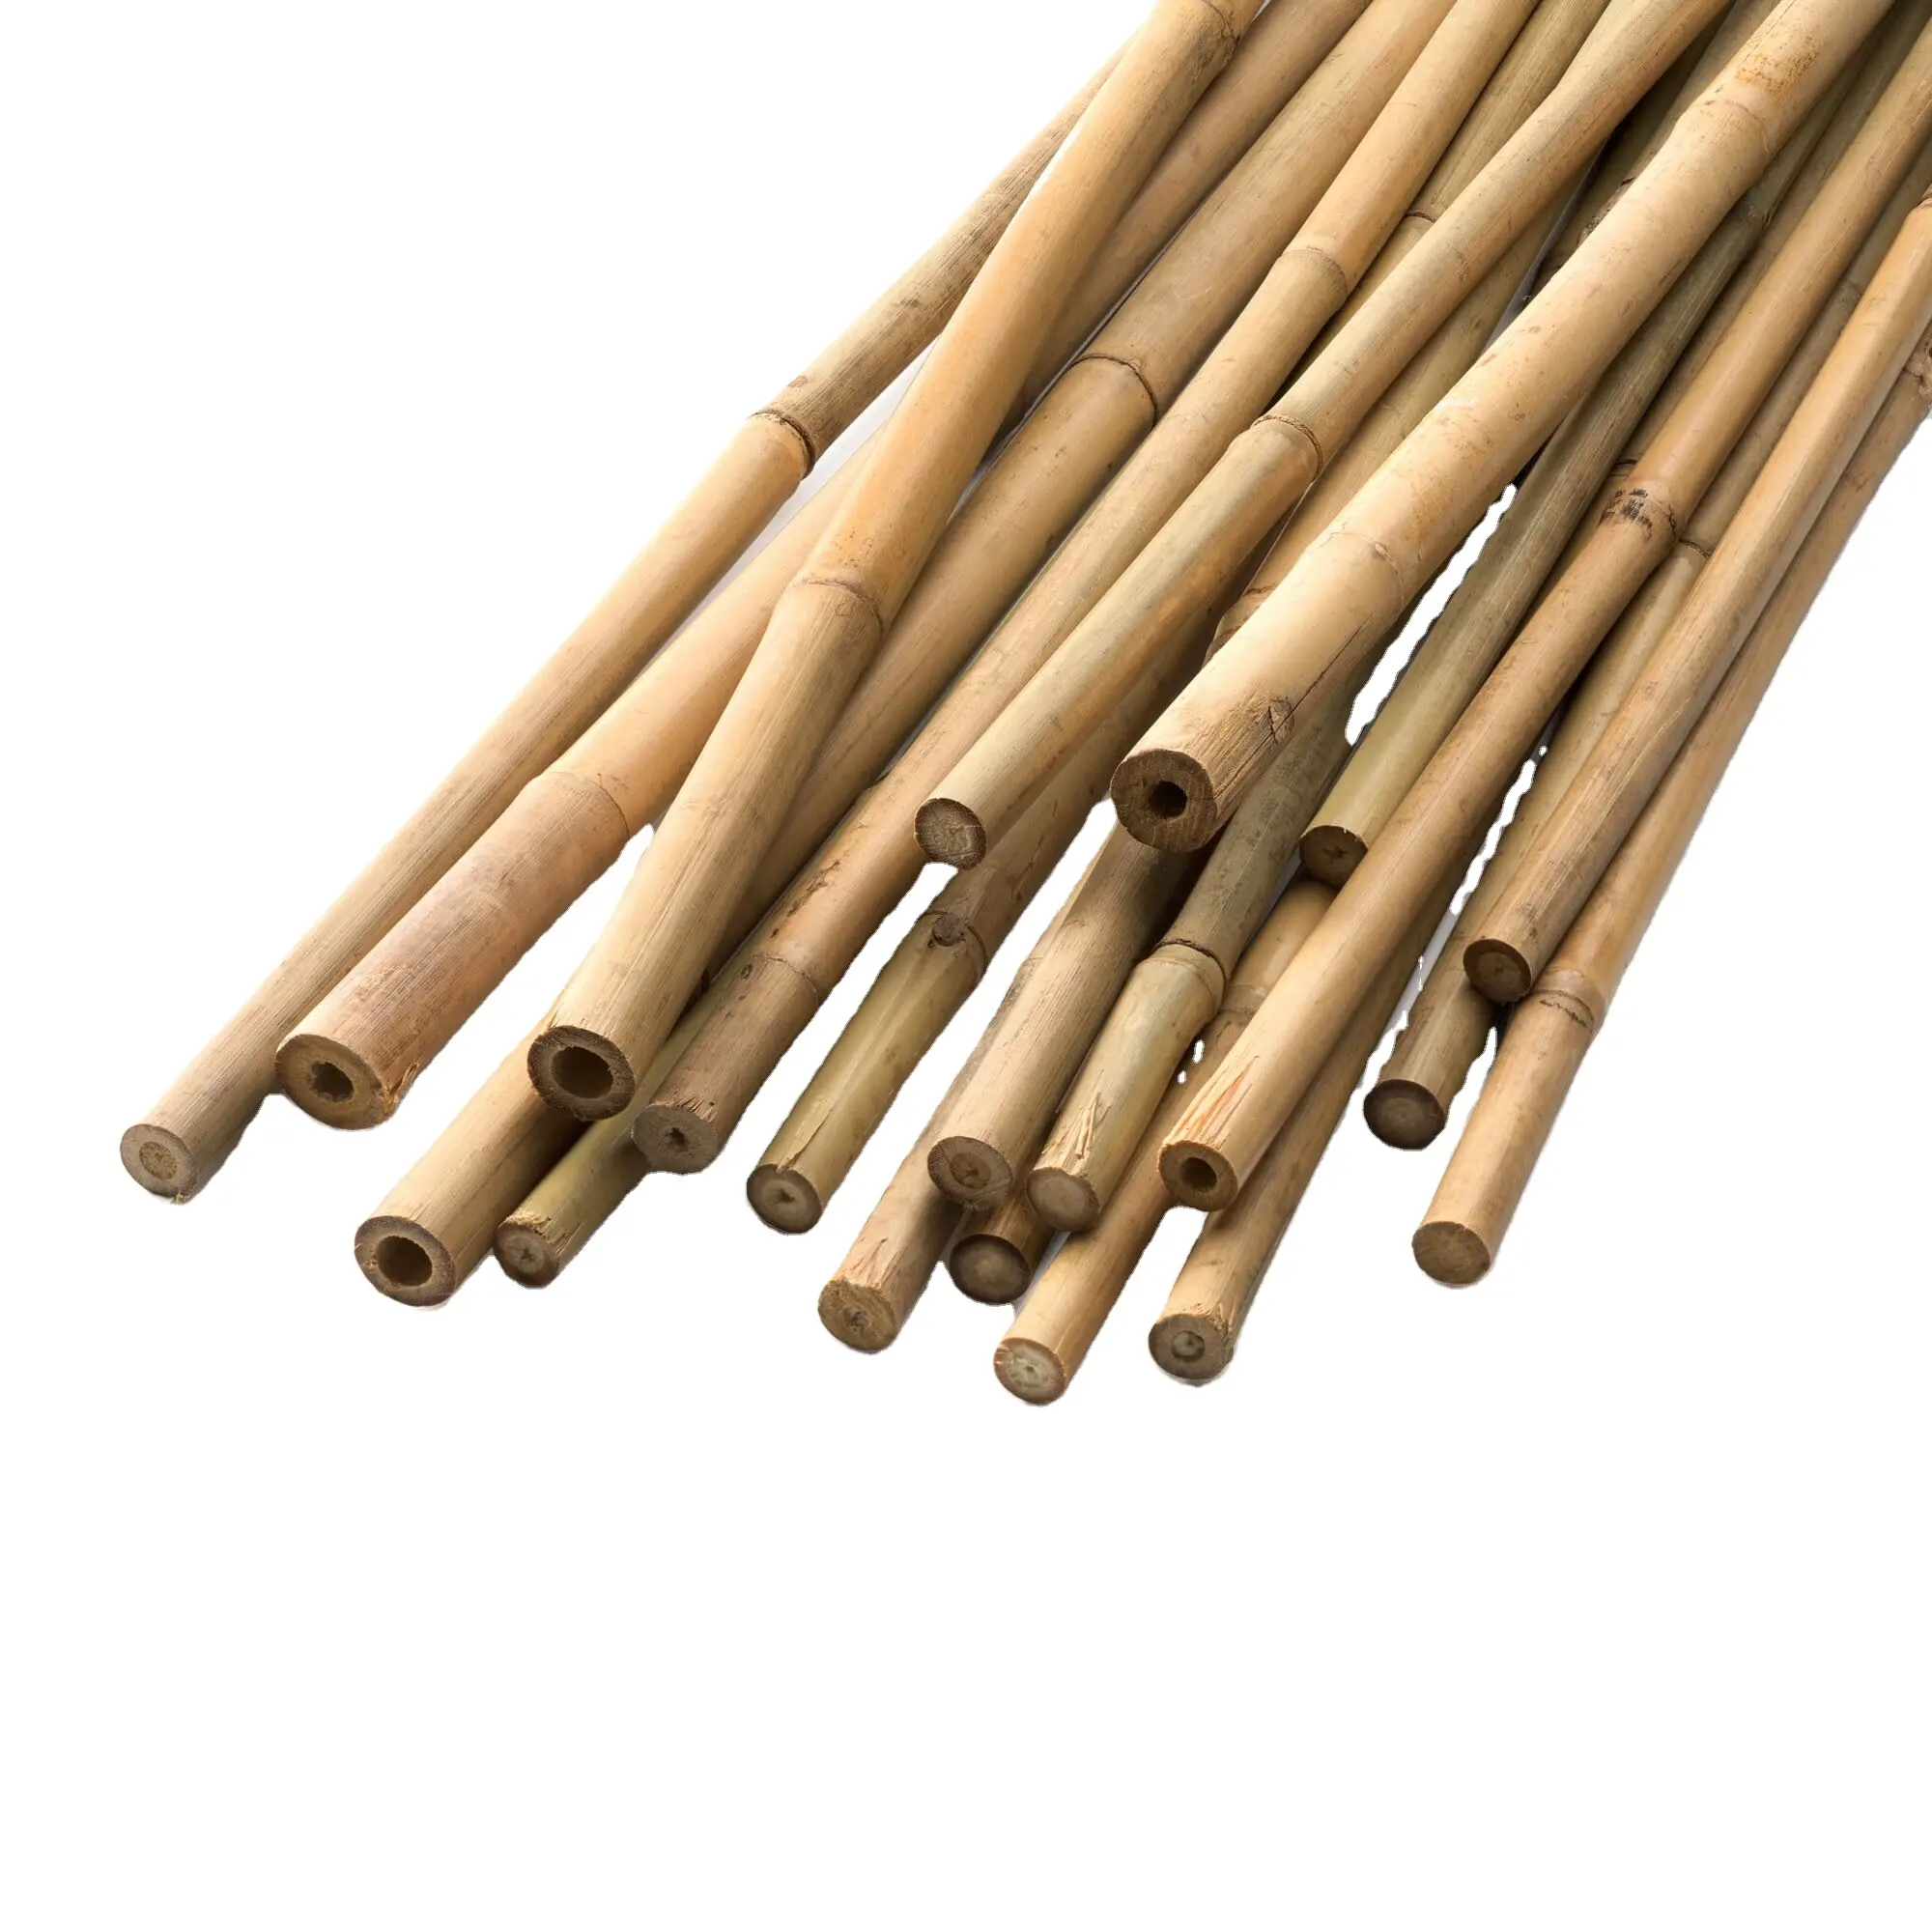 VIETNAMESE BEST PRICE 100% NATURAL BAMBOO CANES/ BAMBOO STICKS/ BAMBOO POLE SUPPORT PLANT AND GARDEN FROM ECO2GO VIET NAM